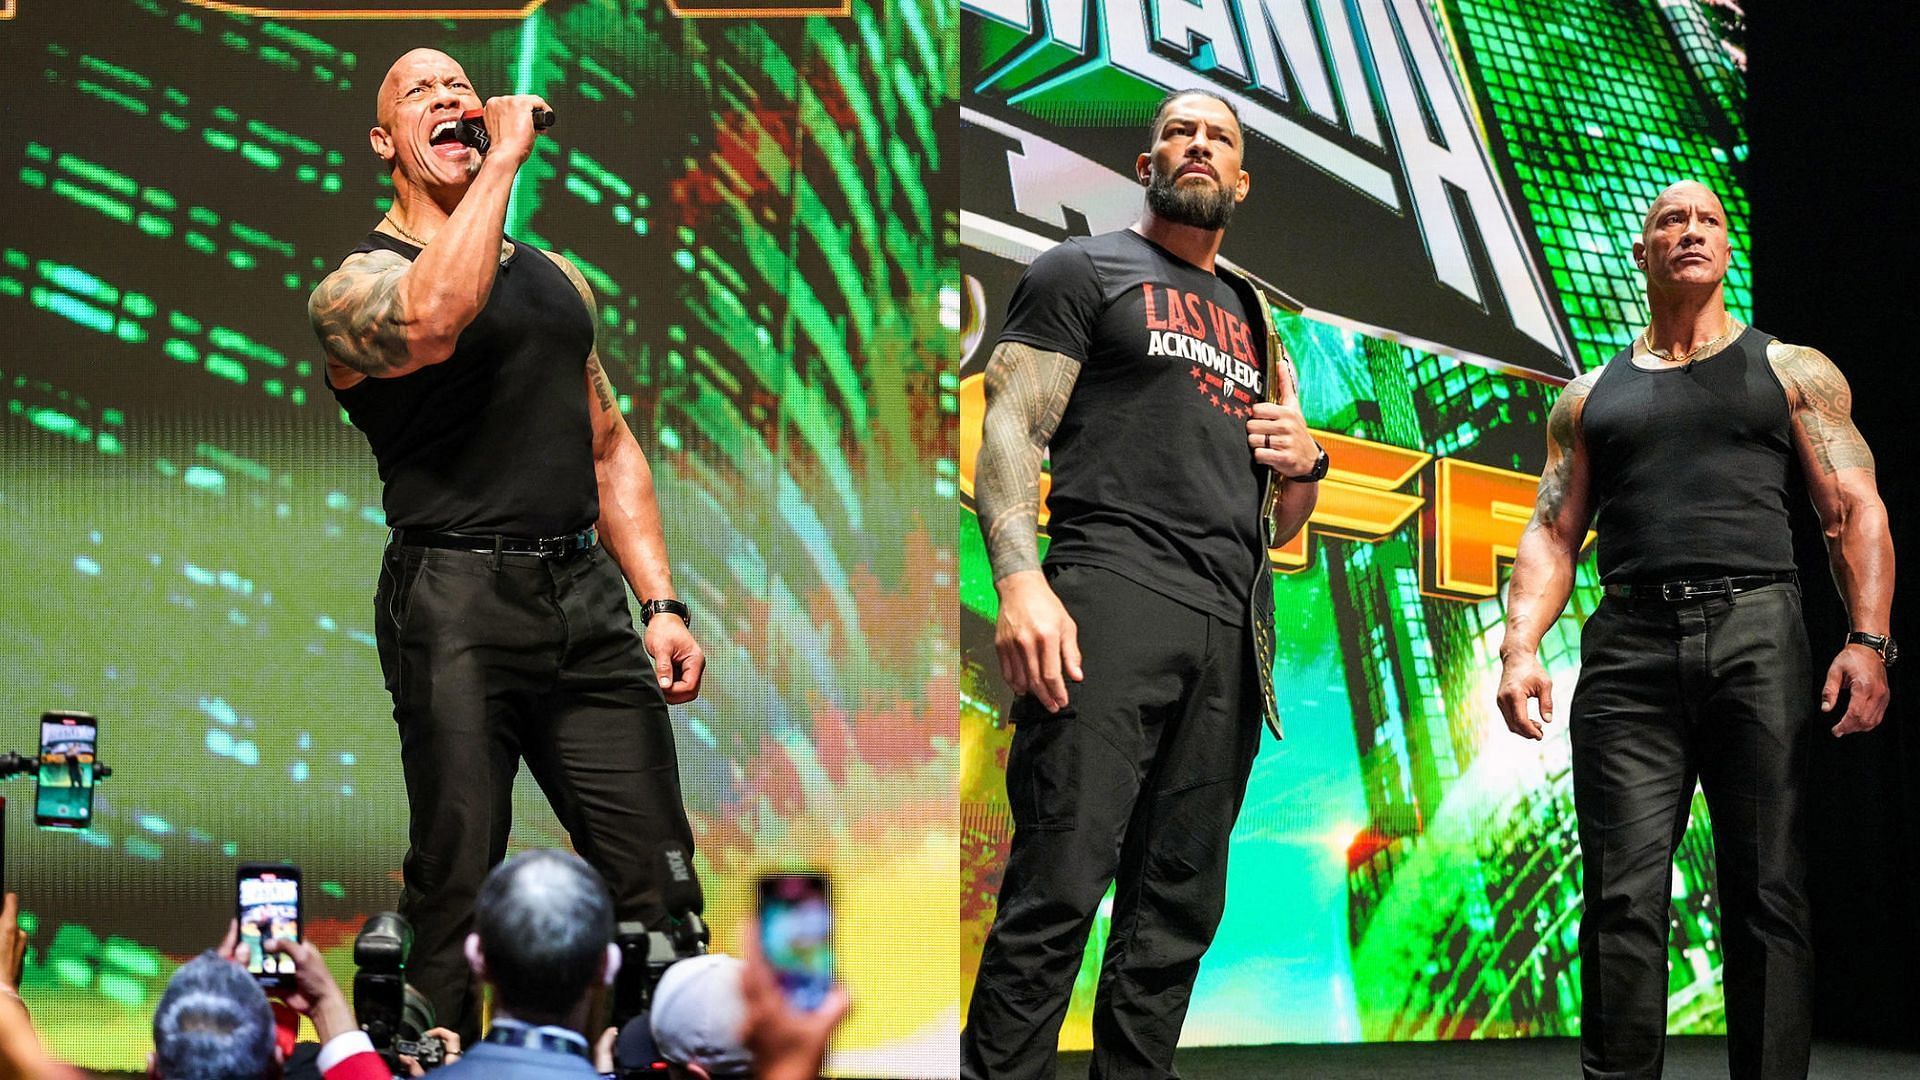 The Rock and Roman Reigns will be returning to SmackDown